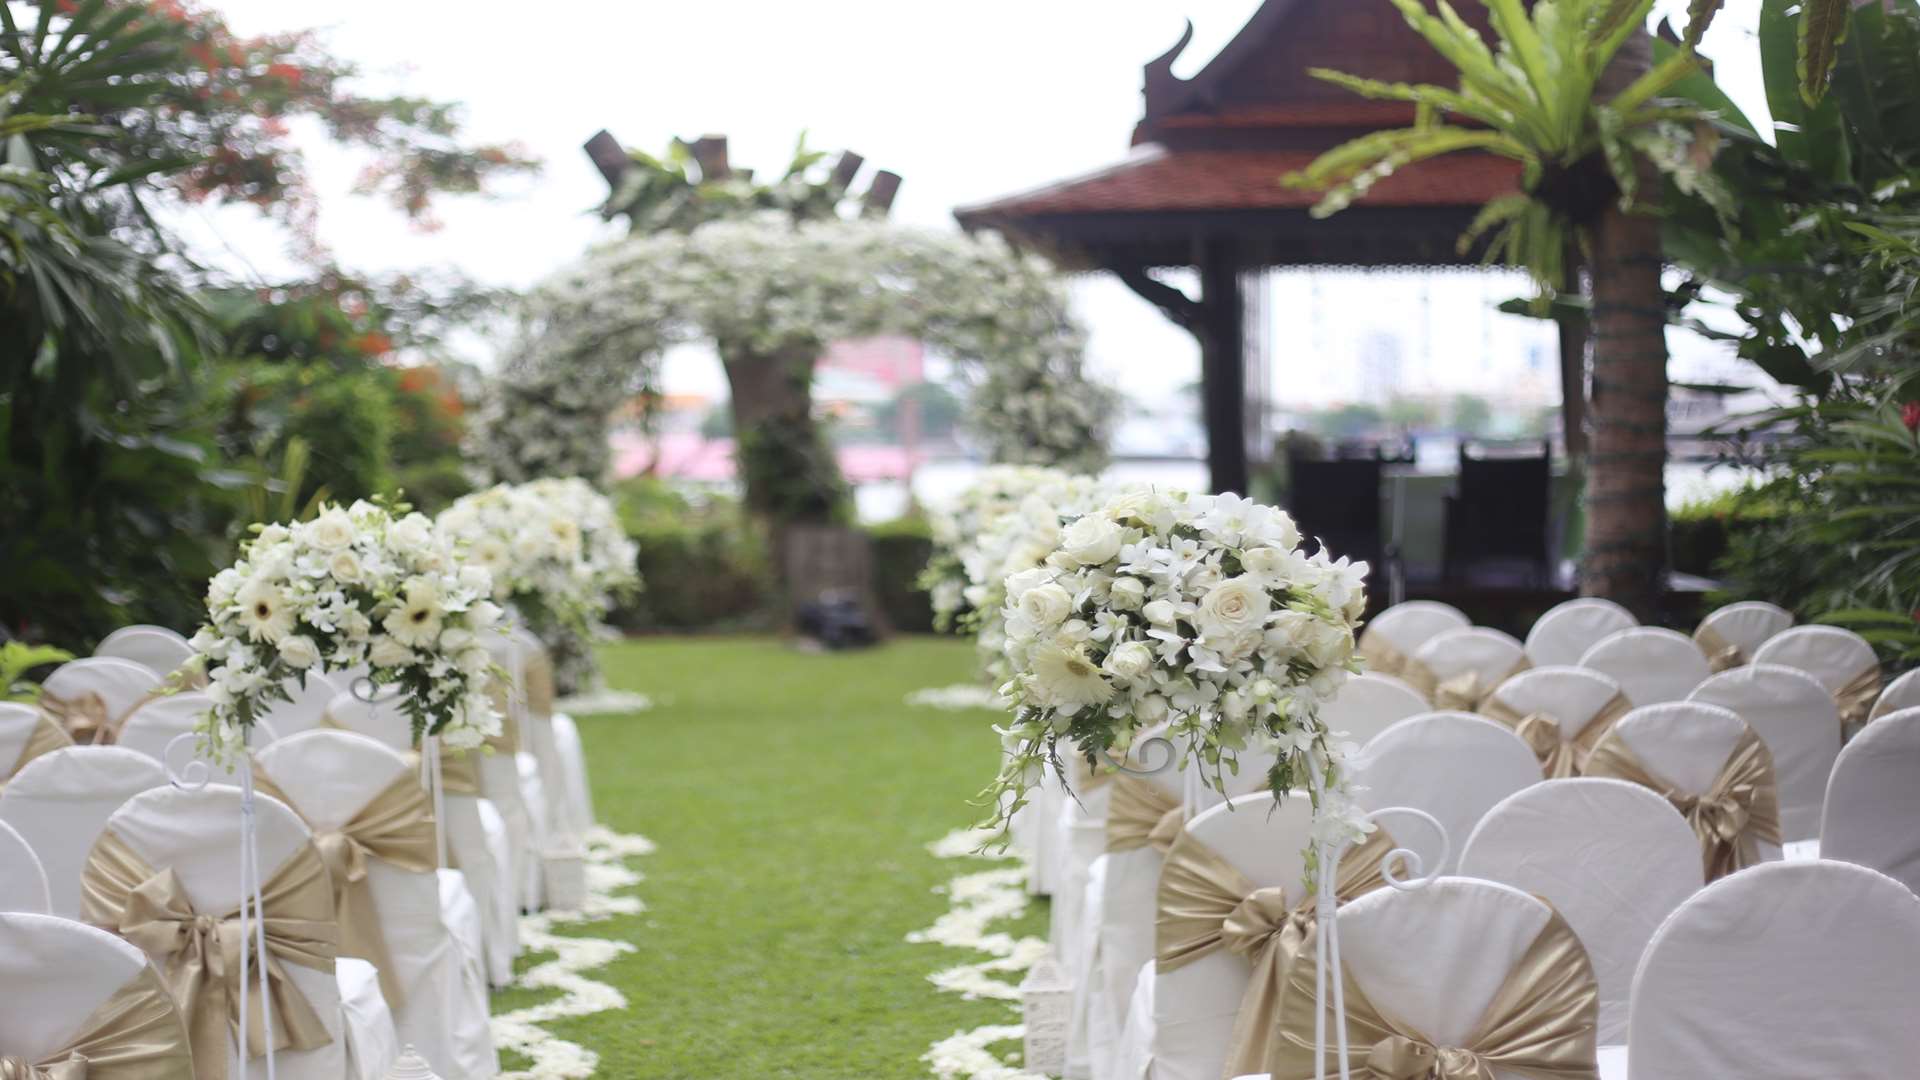 The guidelines for where to hold a wedding ceremony are strictly laid down.